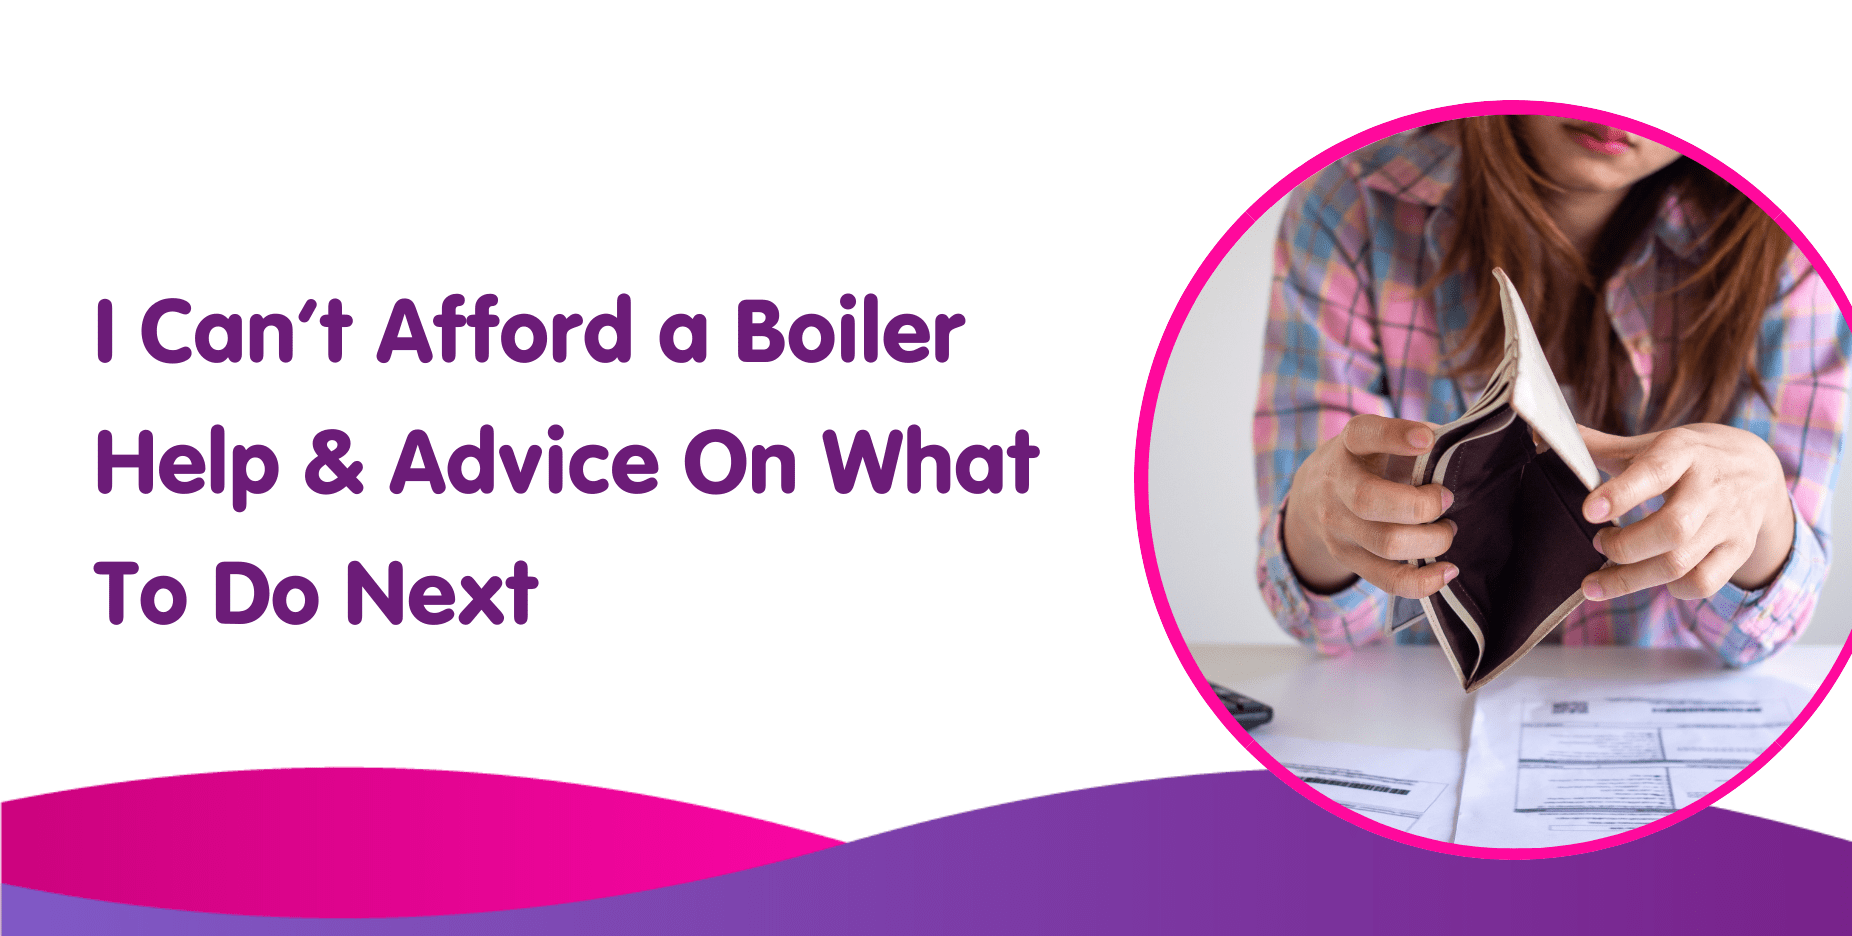 I Can’t Afford a Boiler Help & Advice On What To Do Next